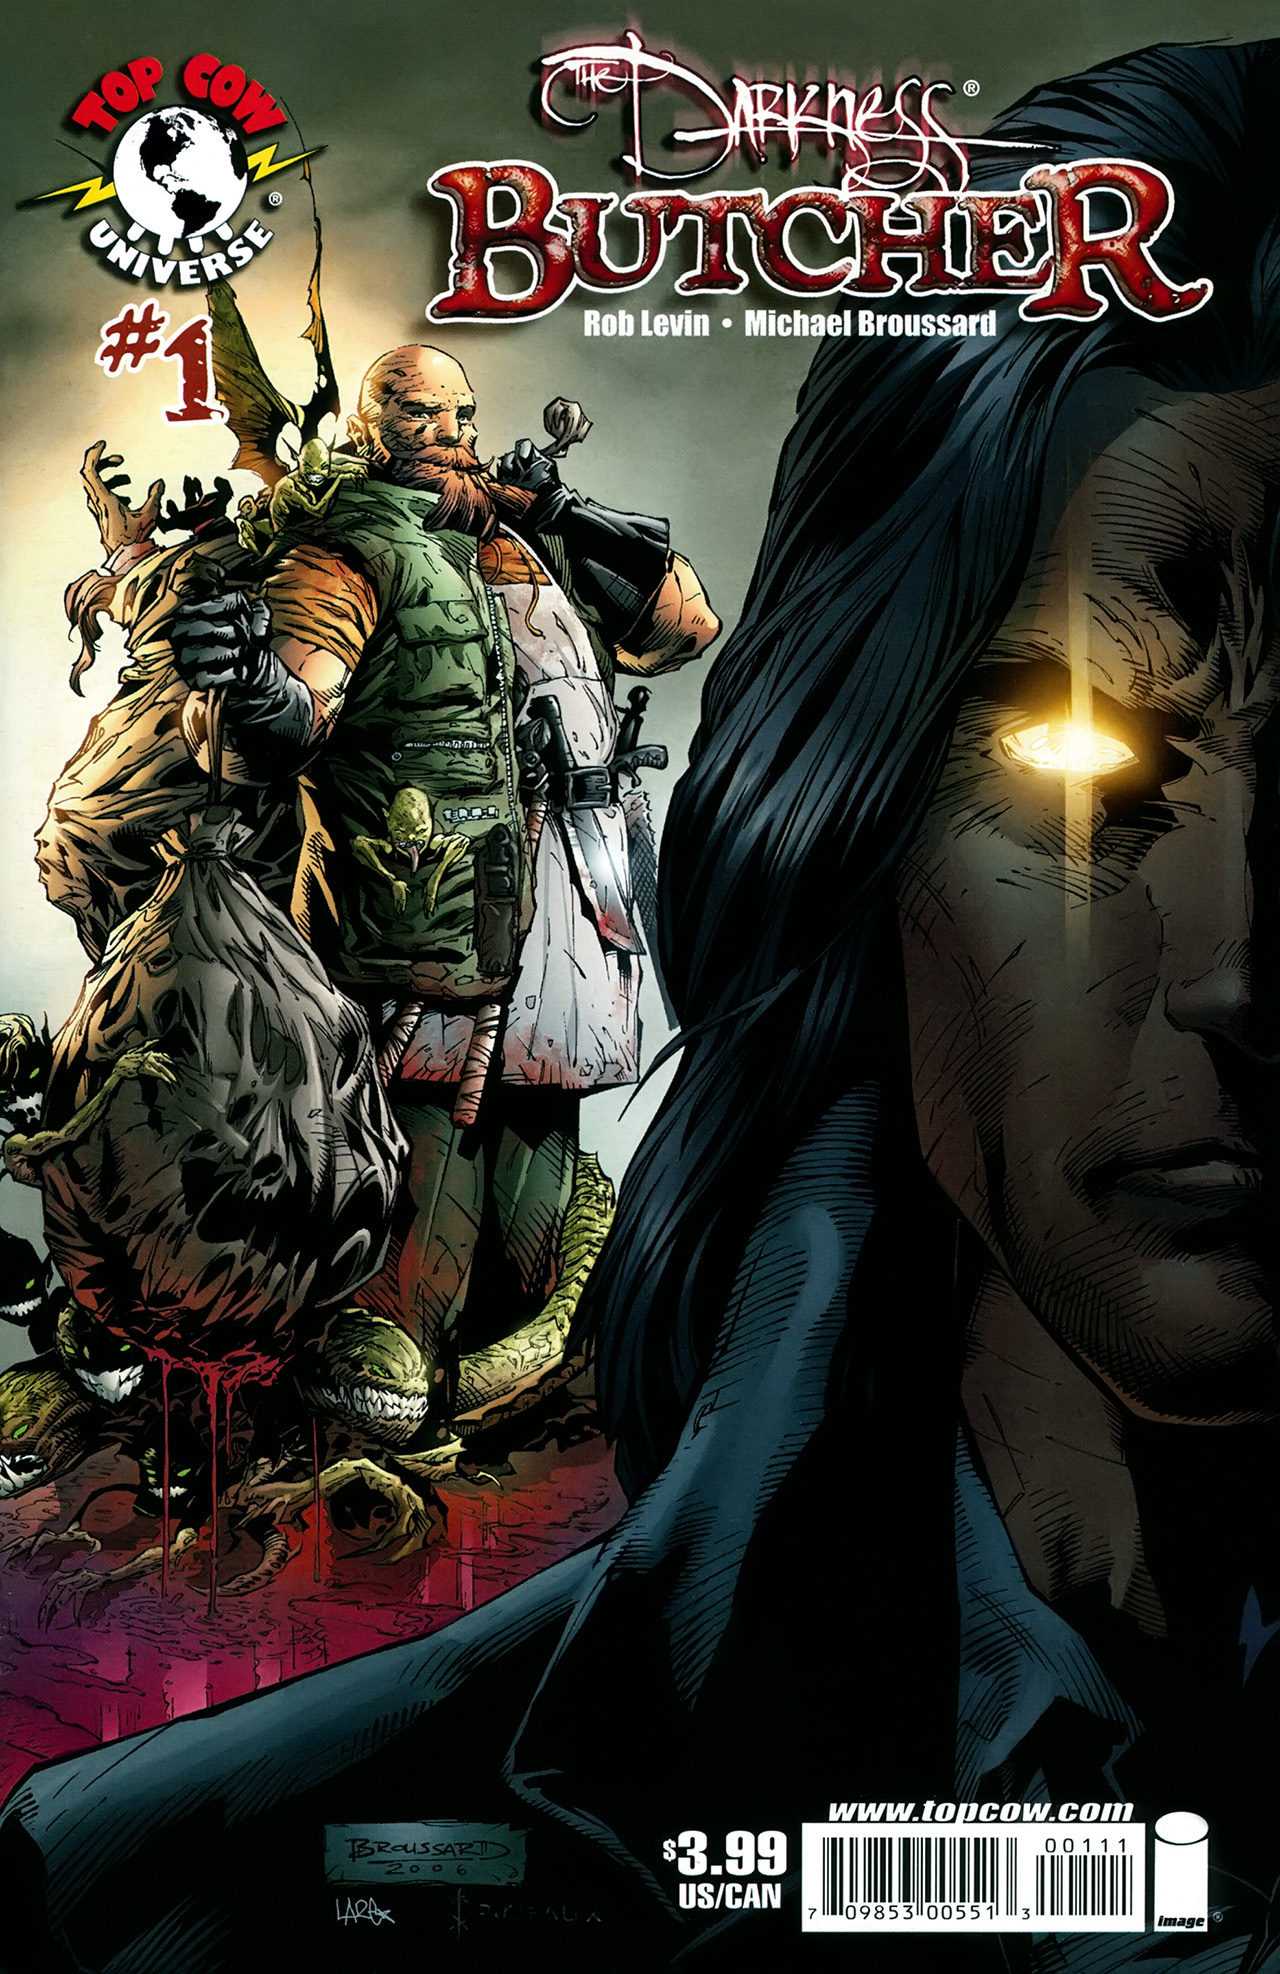 Read online The Darkness: Butcher comic -  Issue # Full - 1